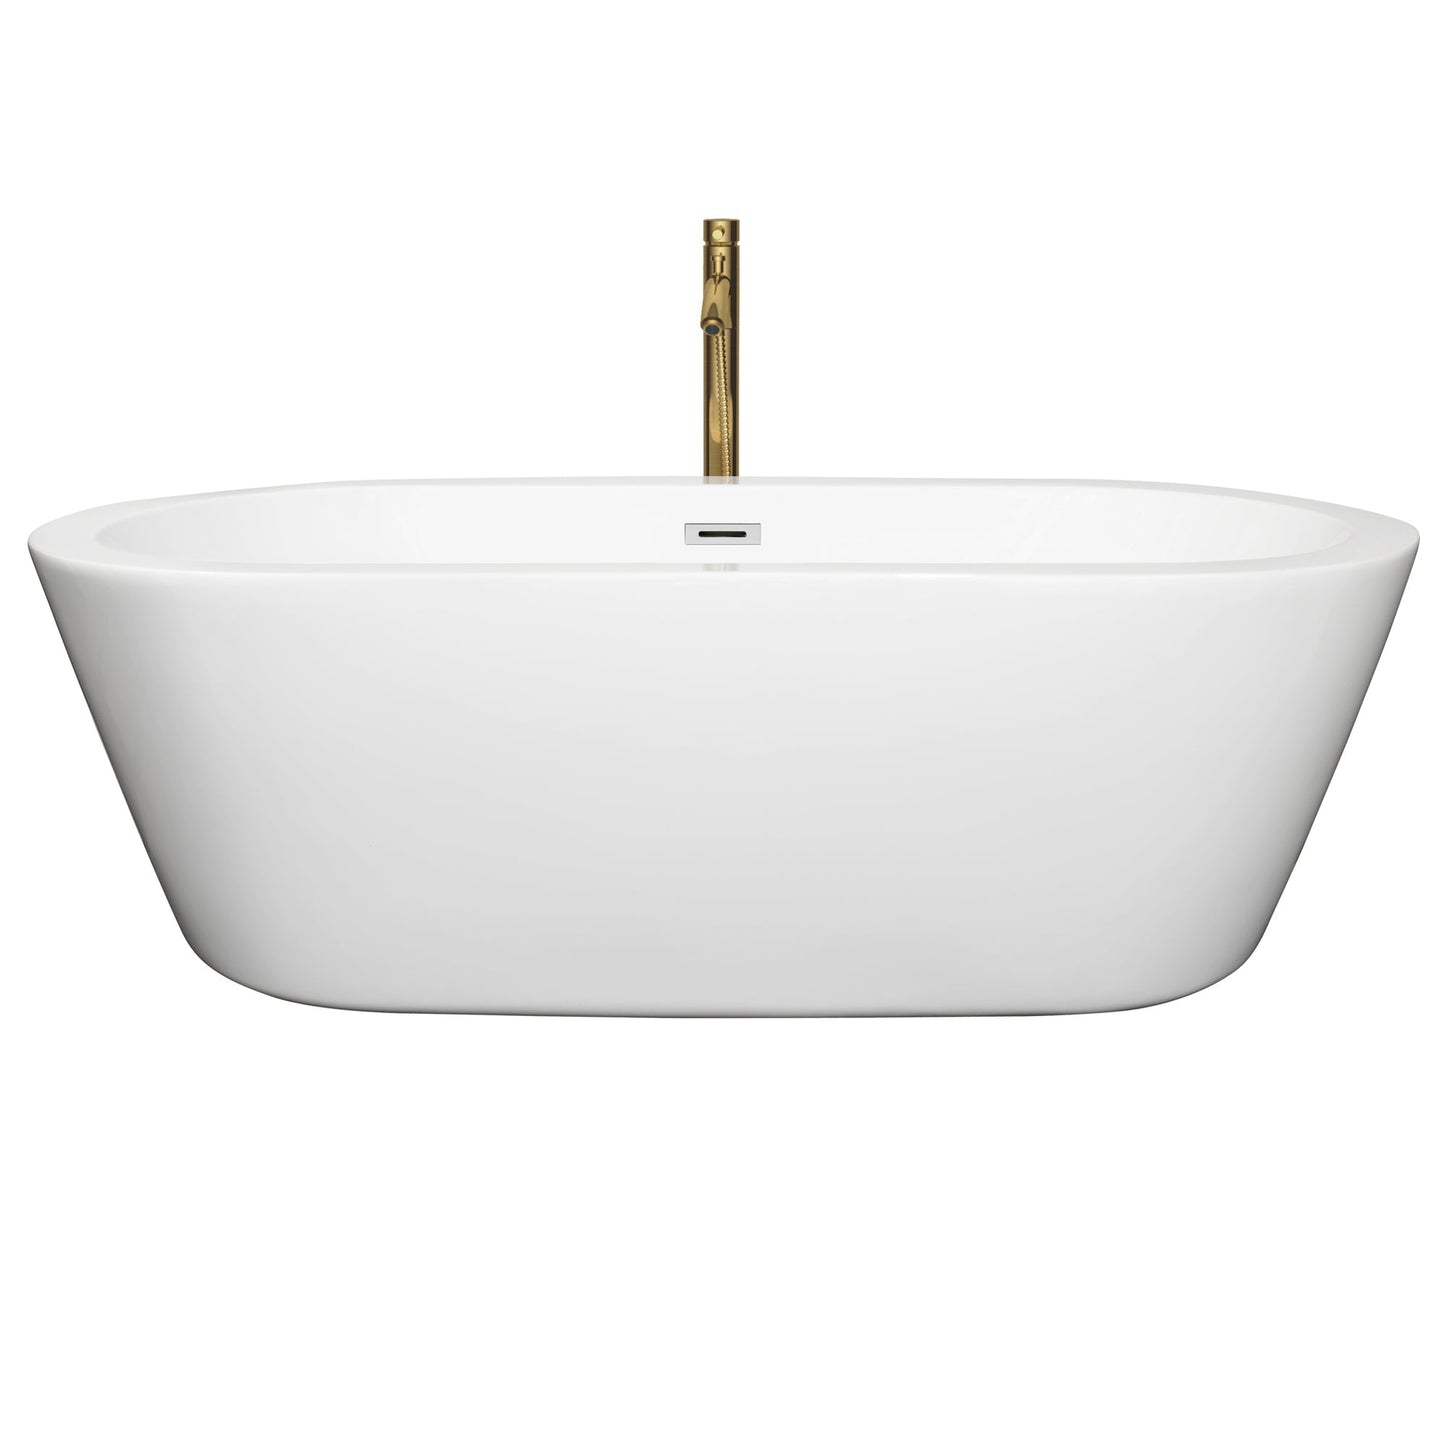 Wyndham Collection Mermaid 71" Freestanding Bathtub in White With Polished Chrome Trim and Floor Mounted Faucet in Brushed Gold